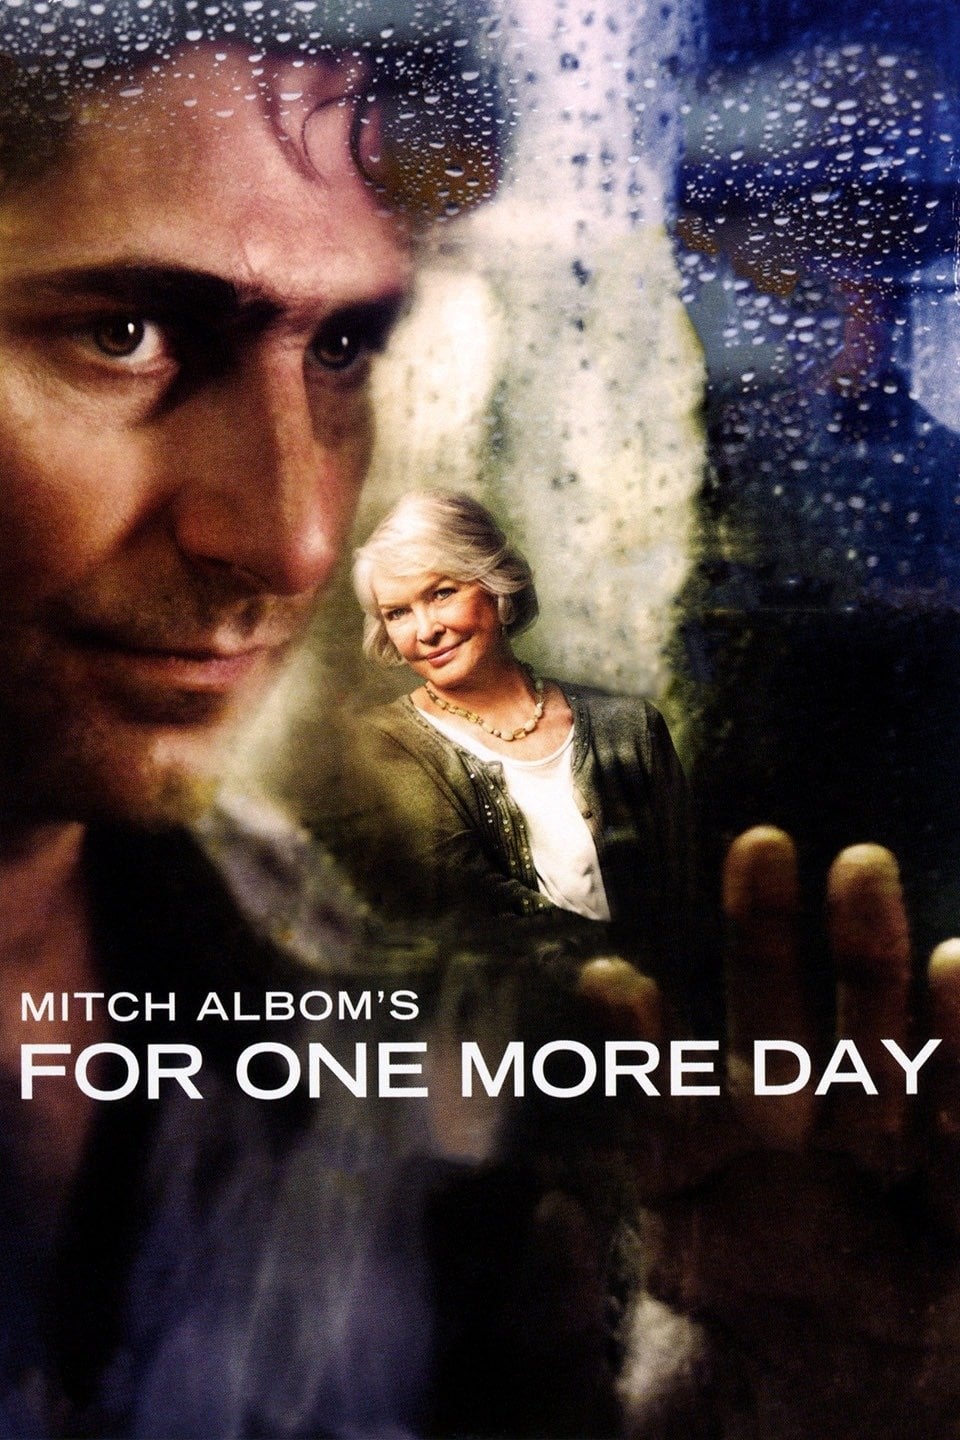 Mitch Albom's For One More Day (2007)